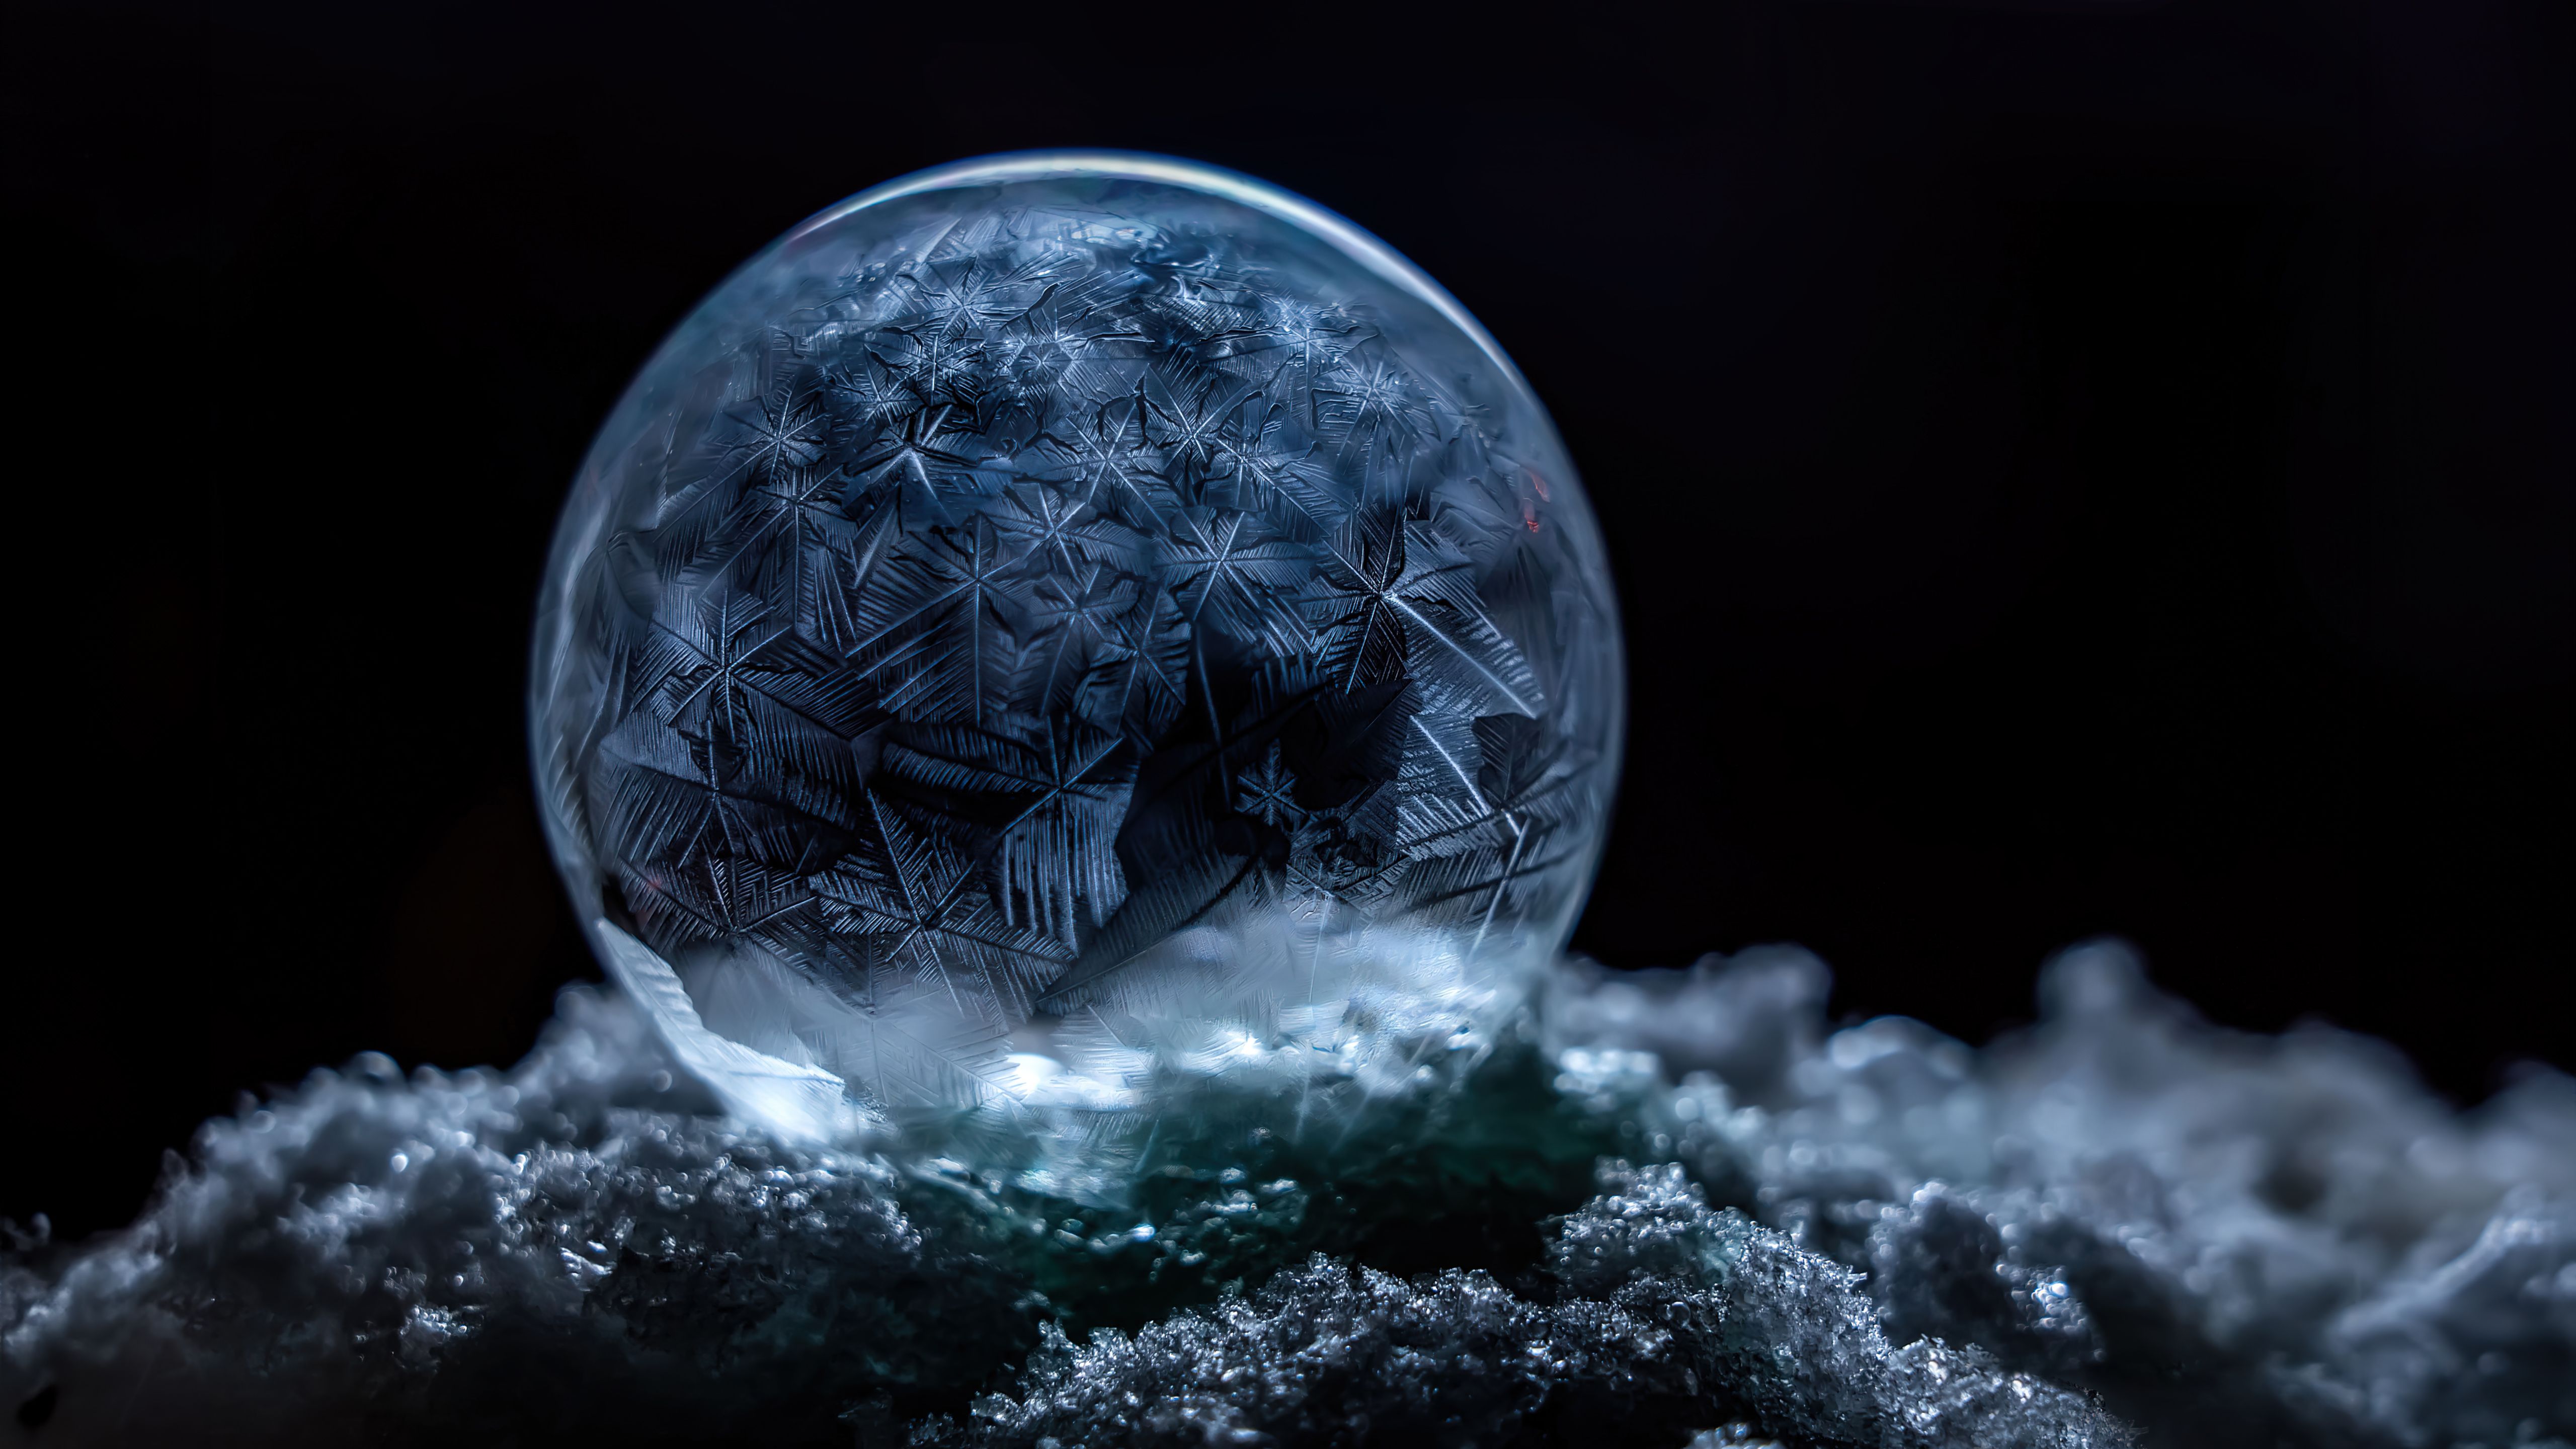 A bubble is frozen in a pile of snow. - Black